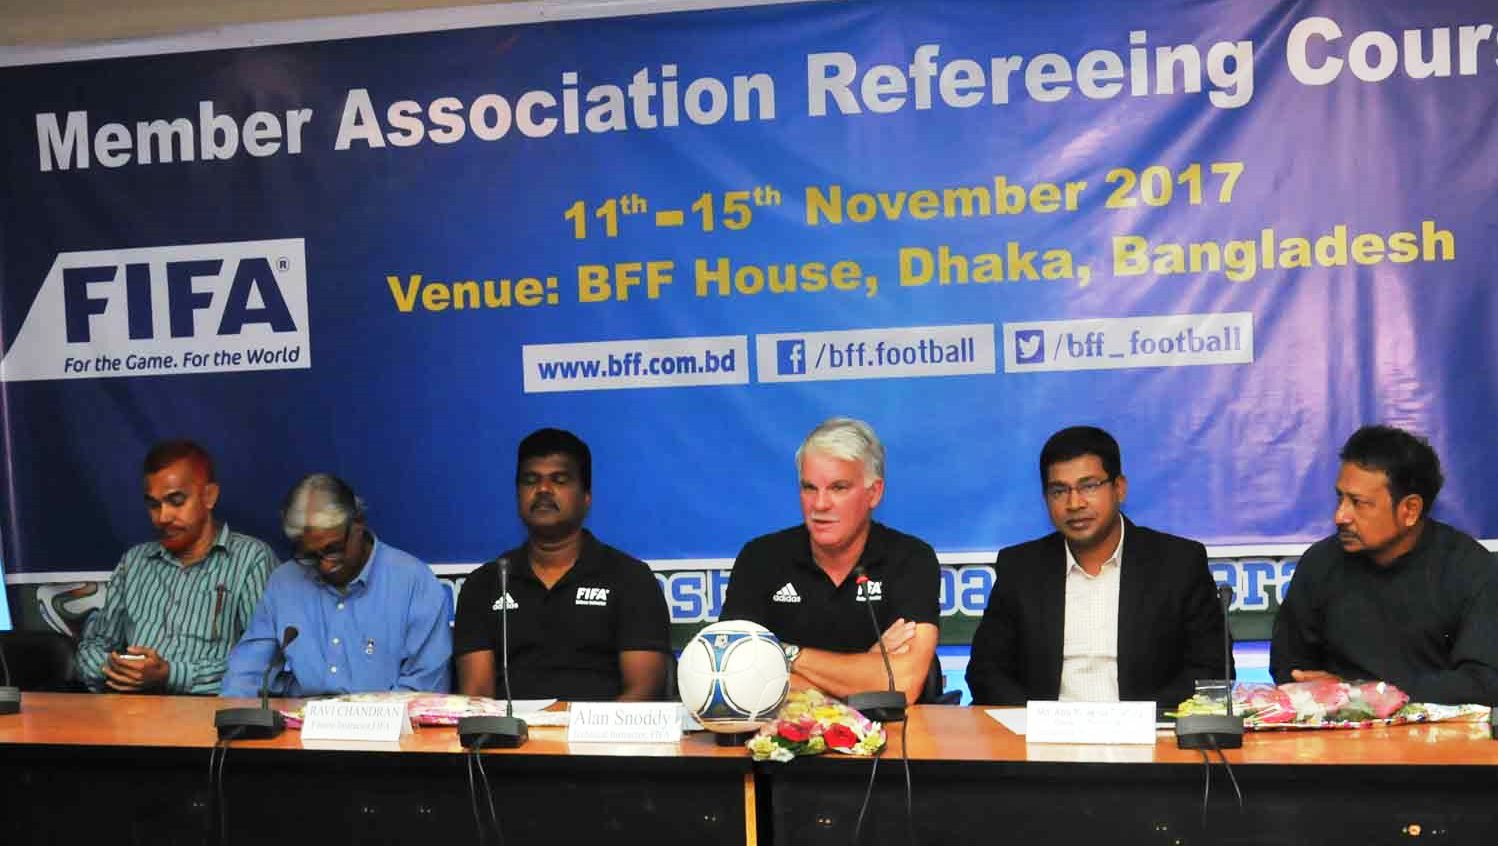 FIFA MA Refereeing Course launched by BFF